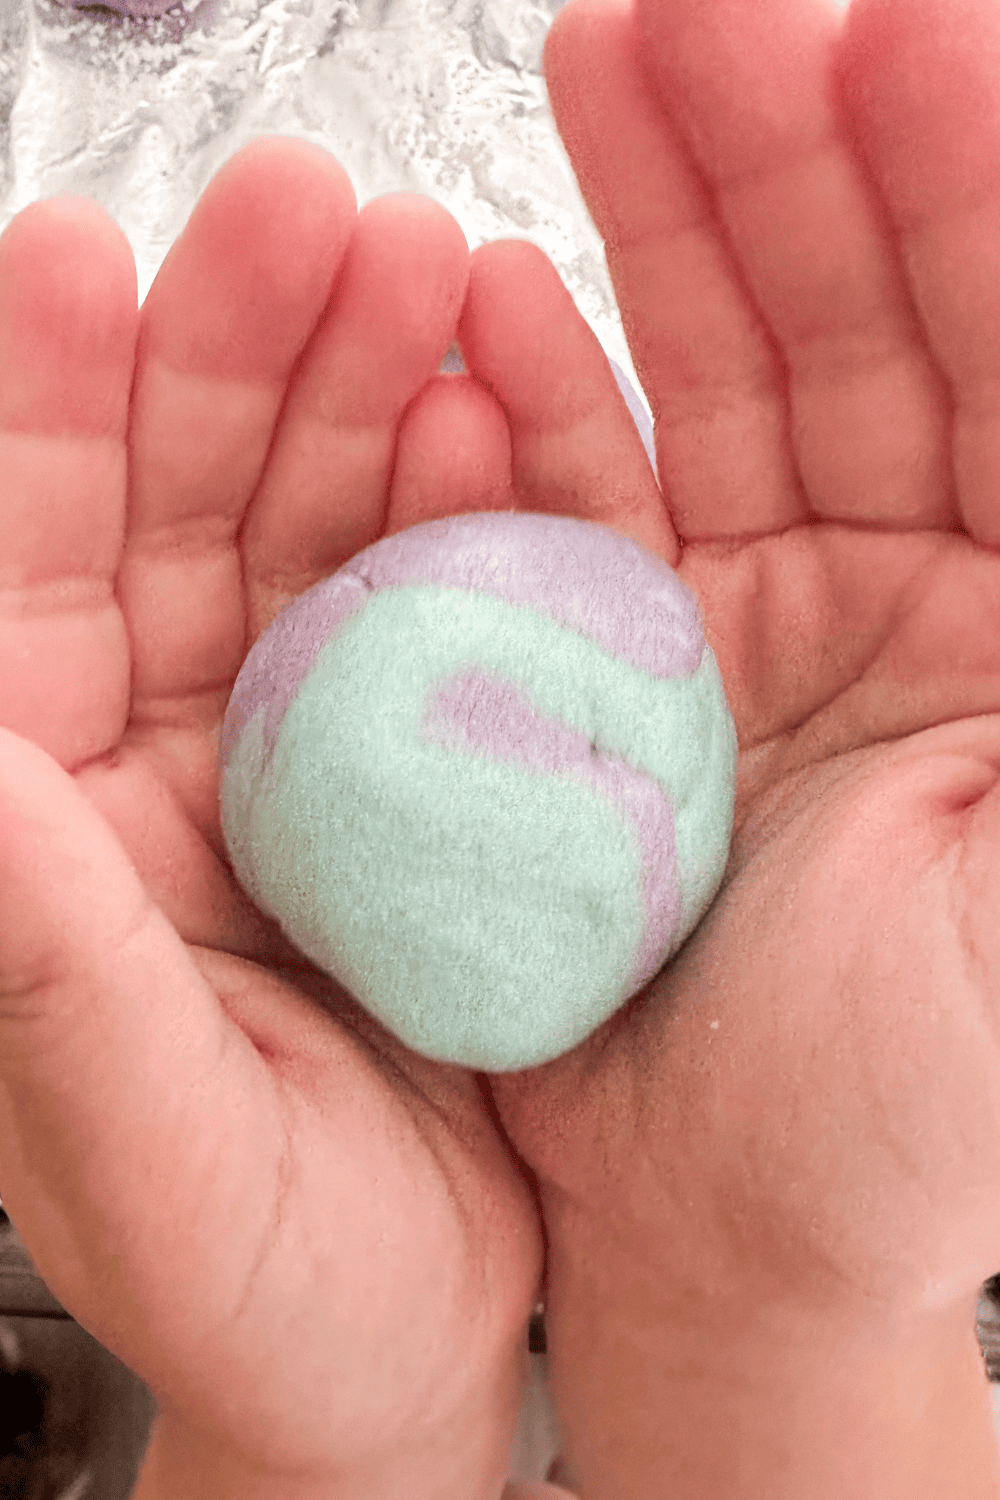 Hands holding a golf ball sized amount of two-toned purple and blue salt dough